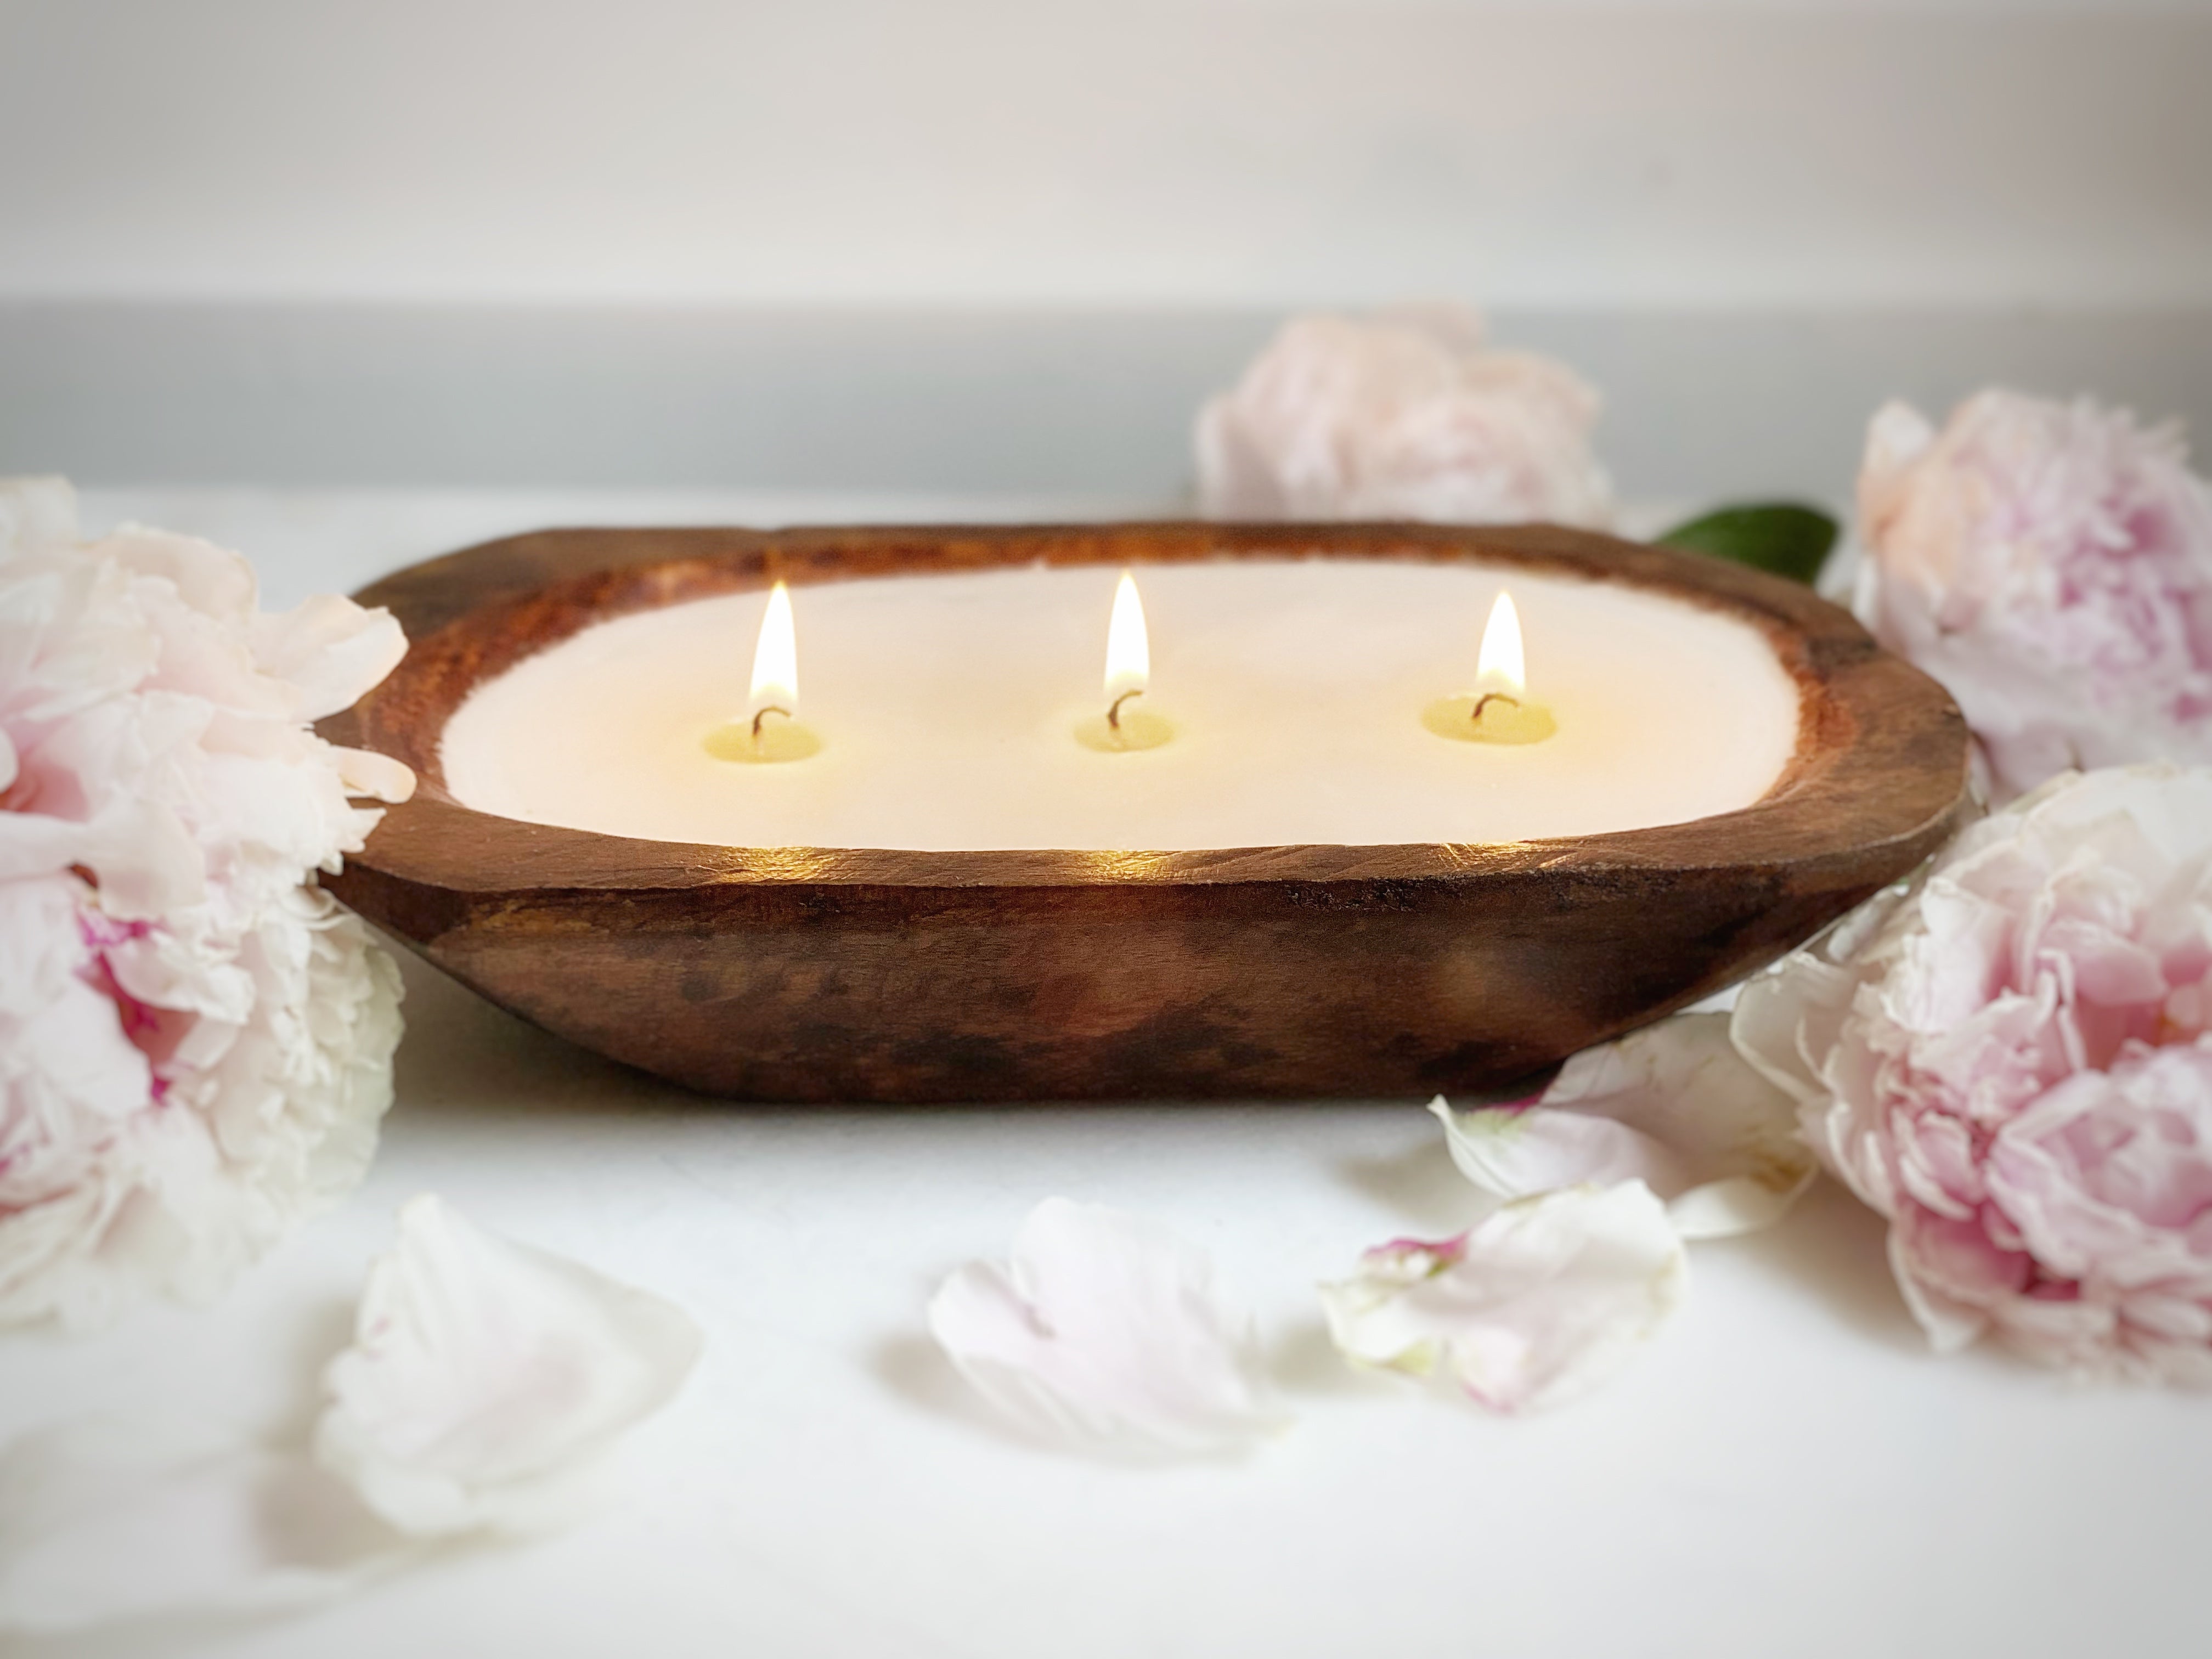 Dough Bowl Candles - 3 Wick | 3-Wick Candle Bowls Create